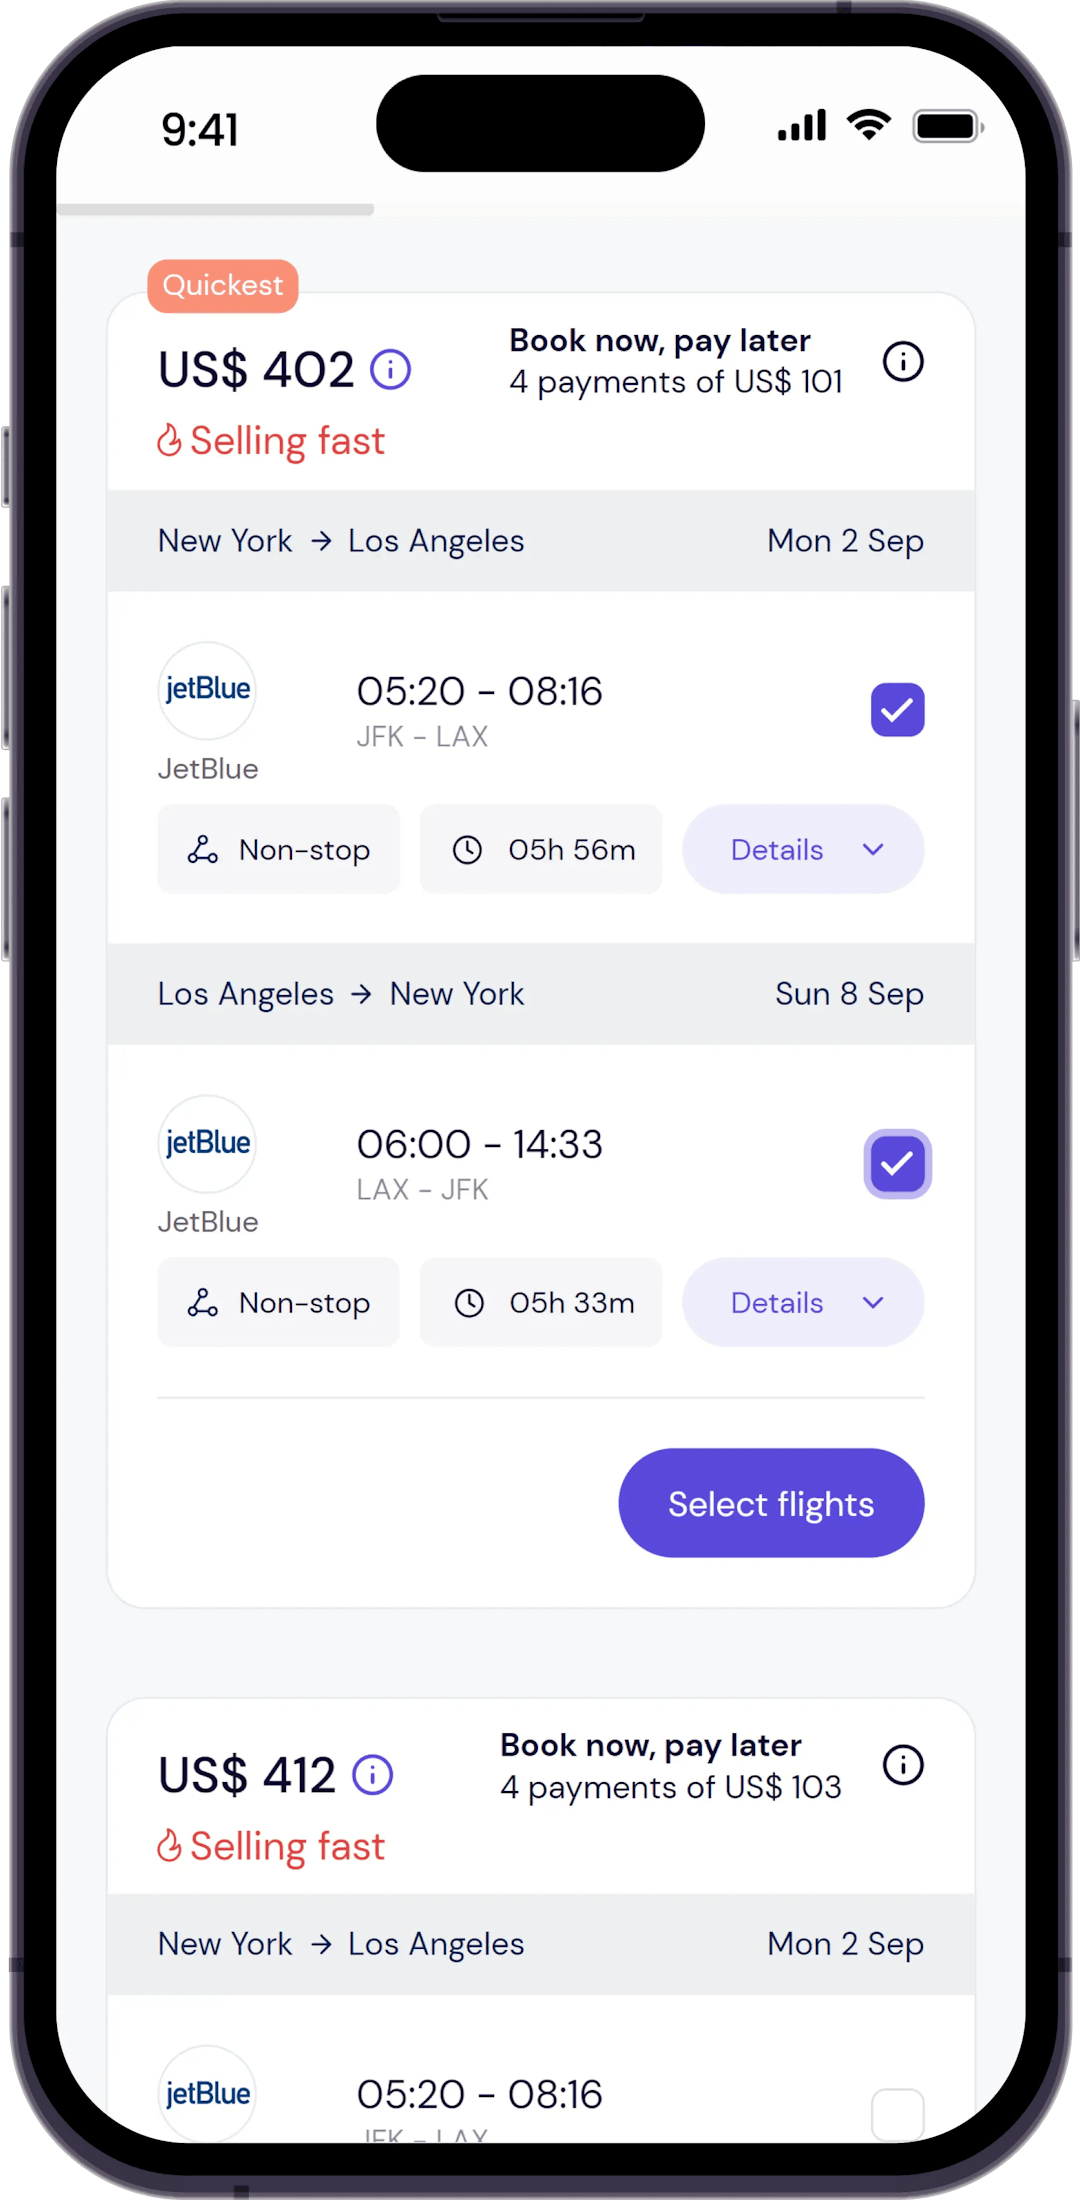 Step 2 - Select the flights you want to book